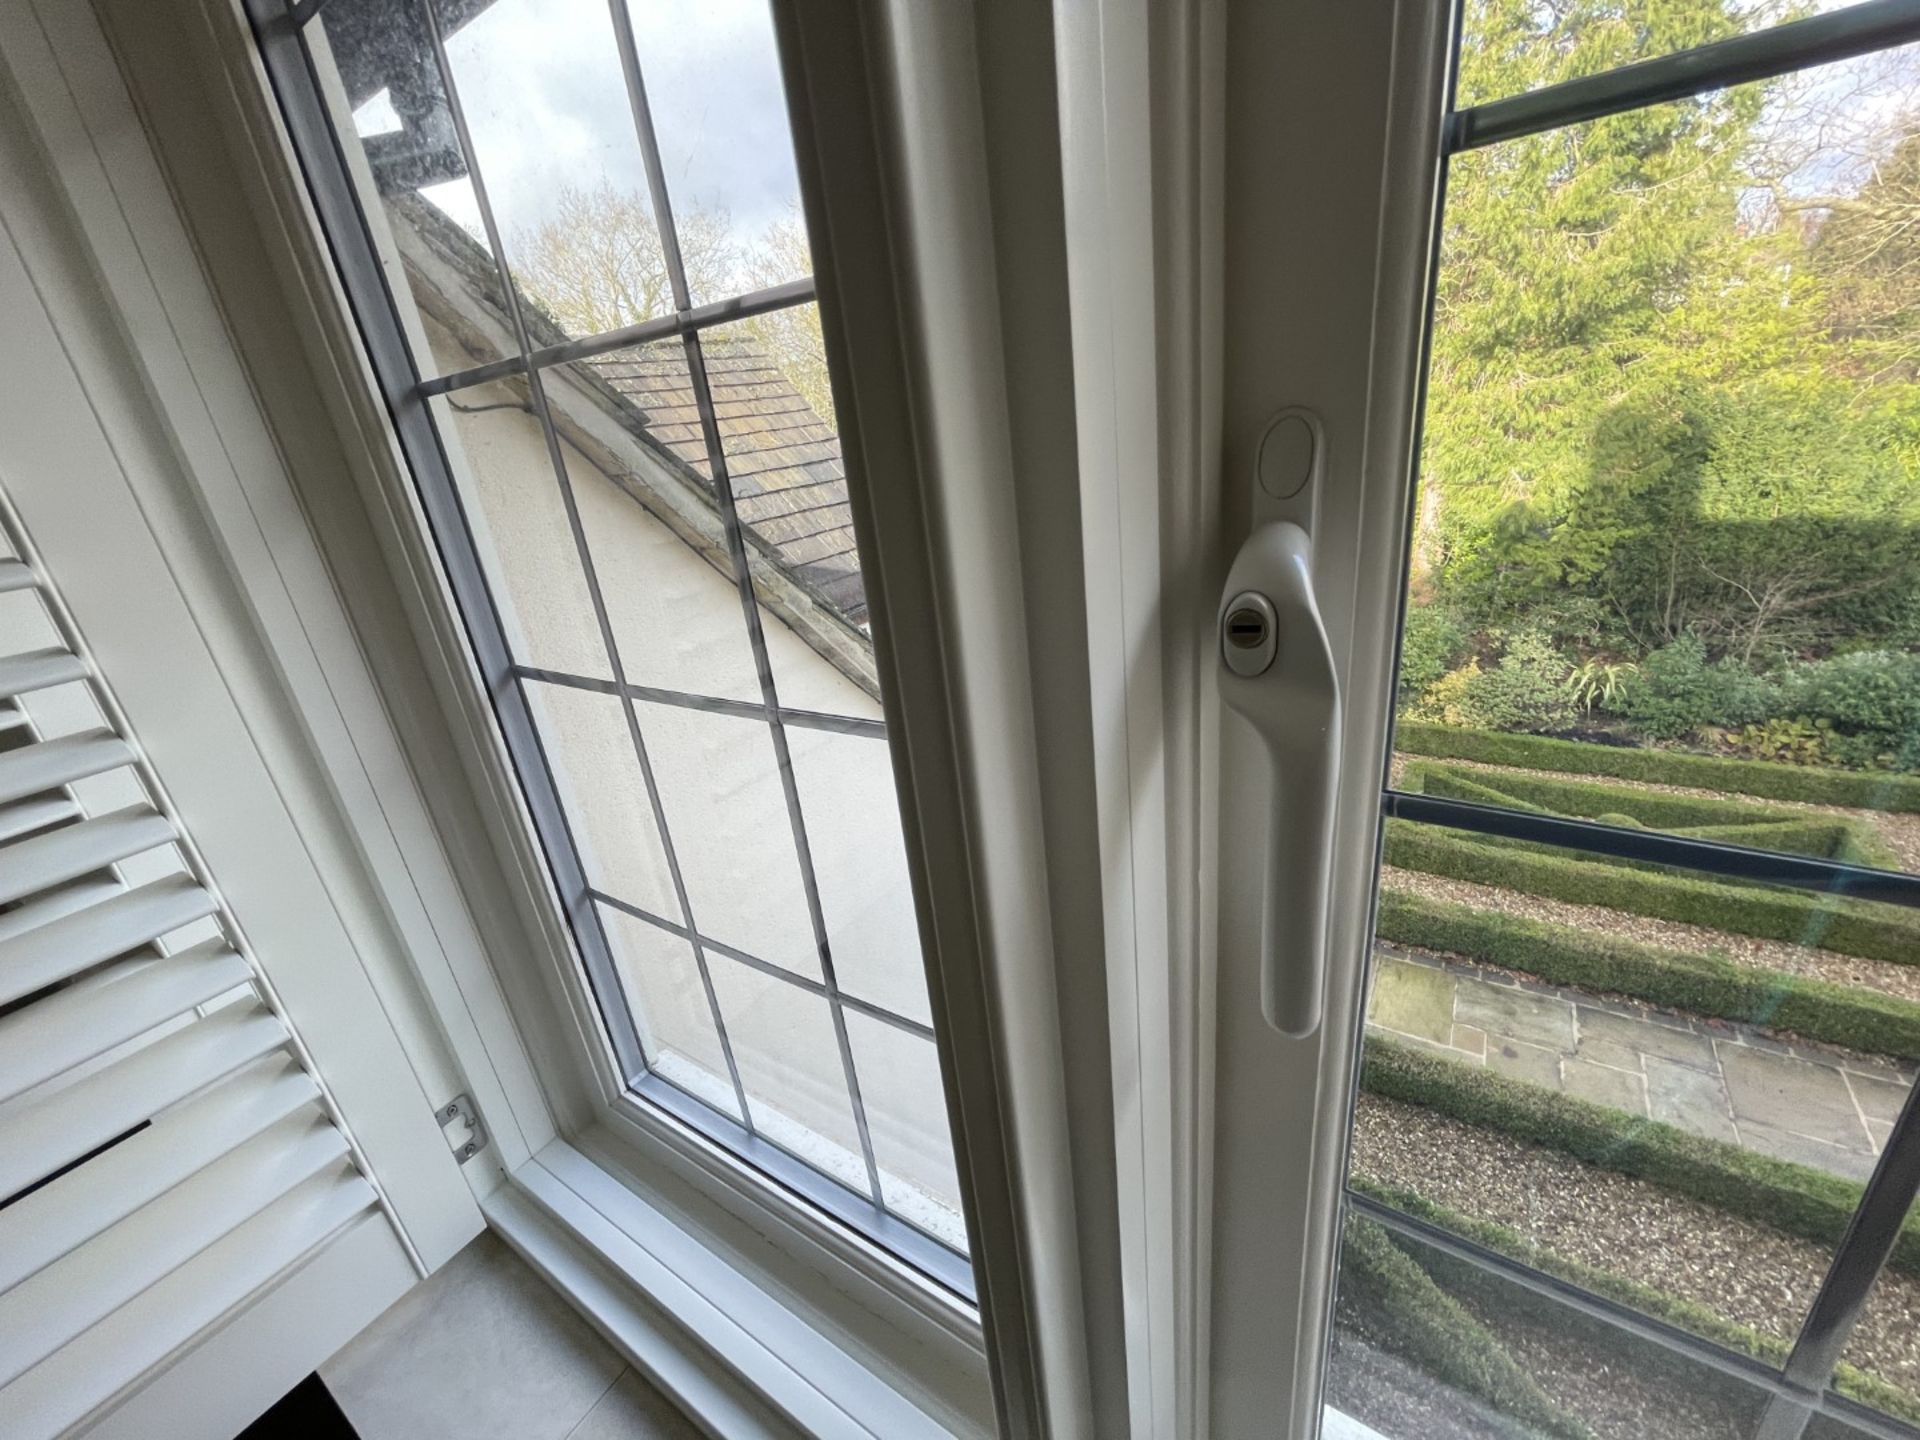 1 x Hardwood Timber Double Glazed Leaded 3-Pane Window Frame fitted with Shutter Blinds - Image 7 of 15